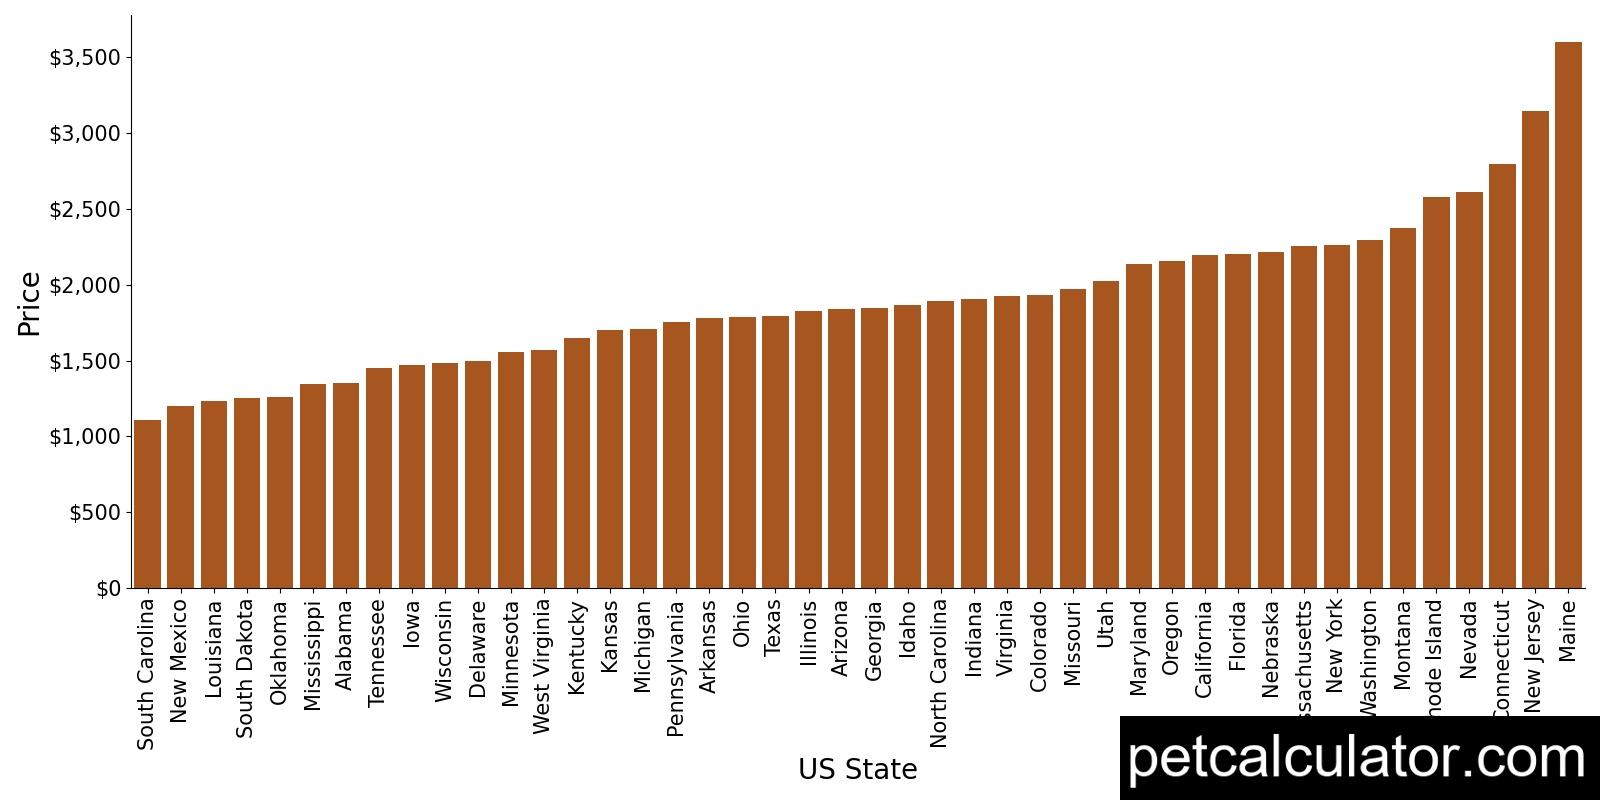 Price of Golden Retriever by US State 